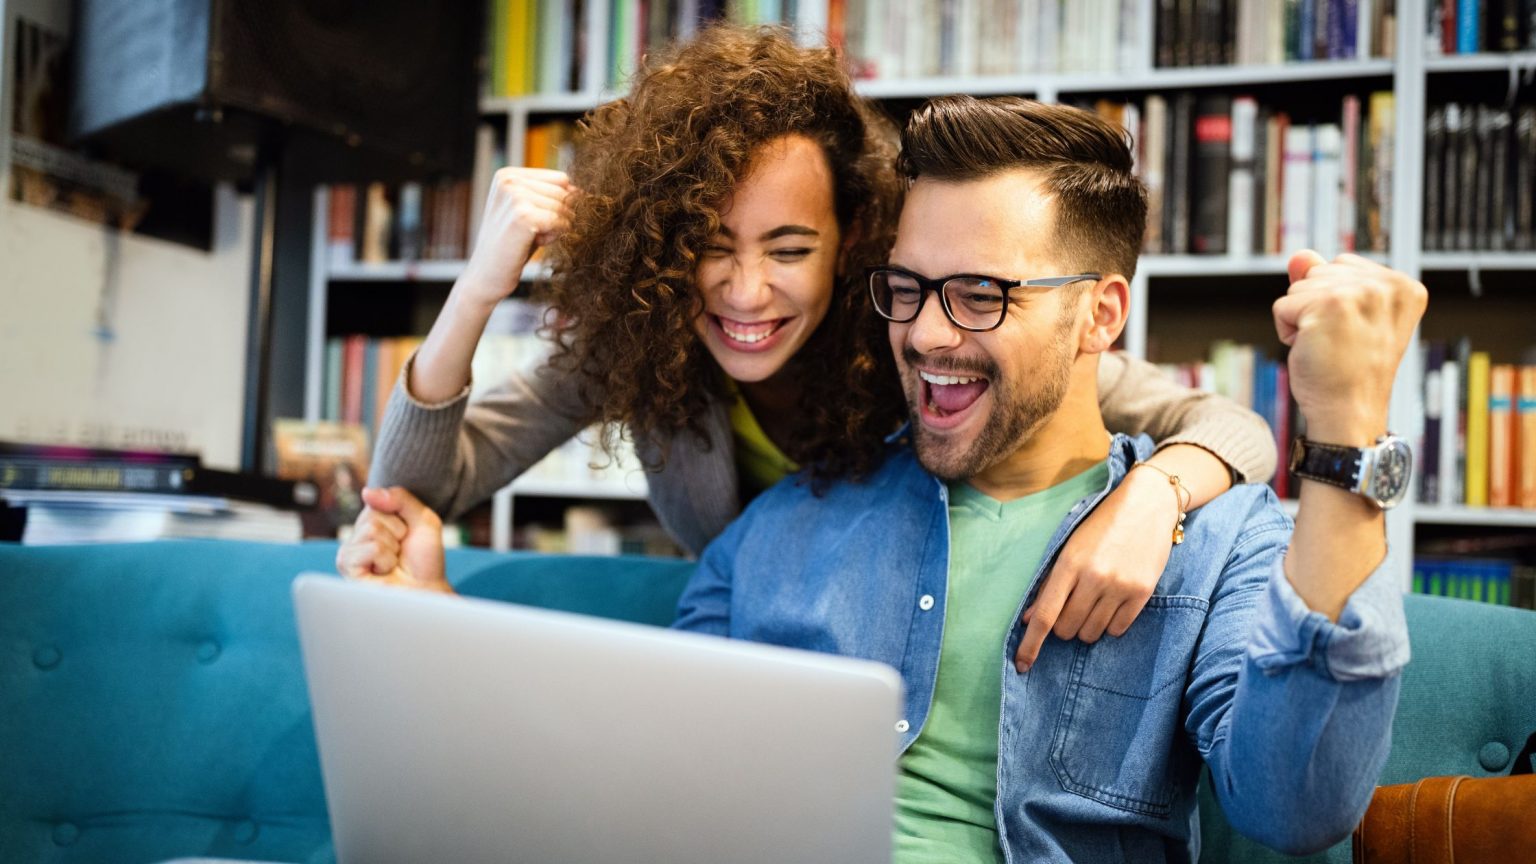 Happy couple excited and smiling at their laptop after getting cleared to close by their online digital remote mortgage lender.